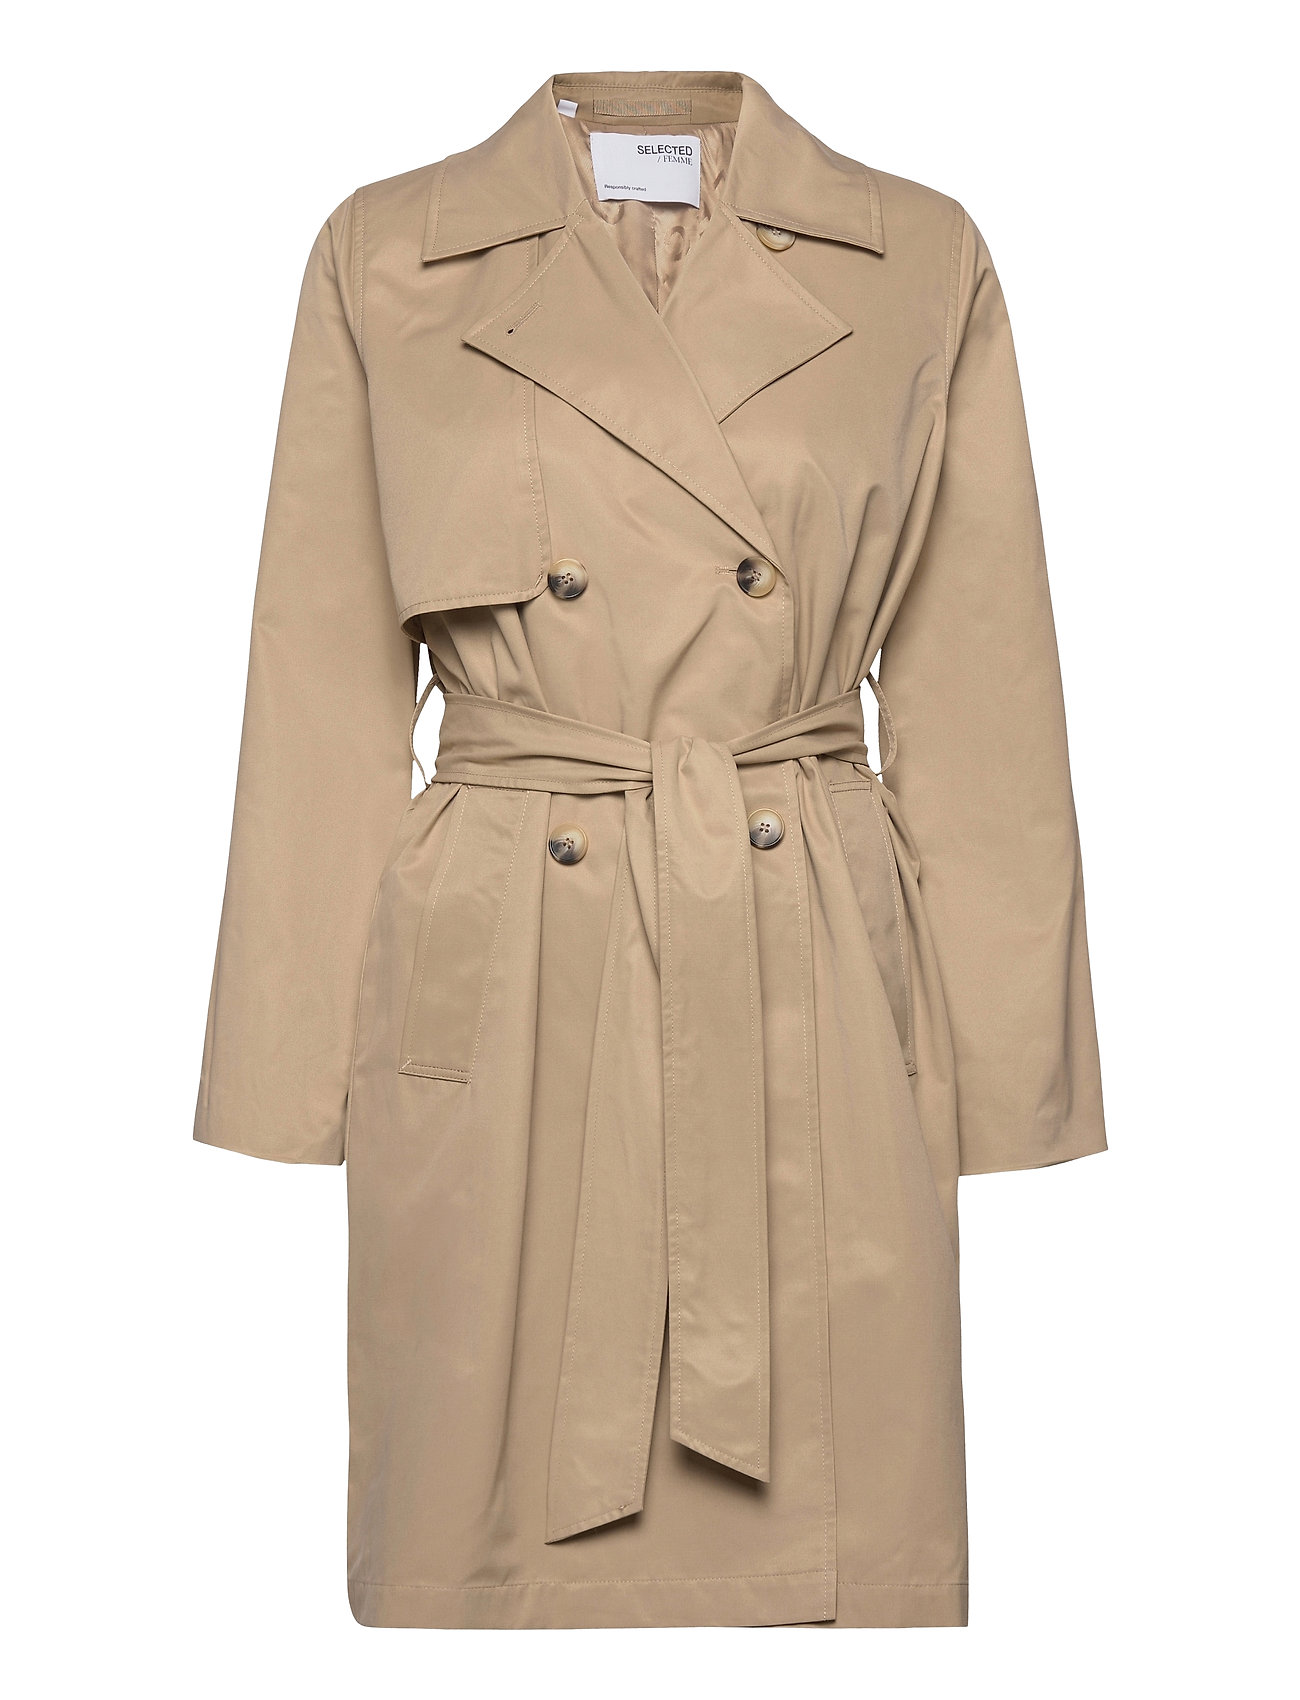 Selected Femme Slfweka - Buy Trench coats from Selected Femme online at Boozt.com. Fast delivery and easy returns